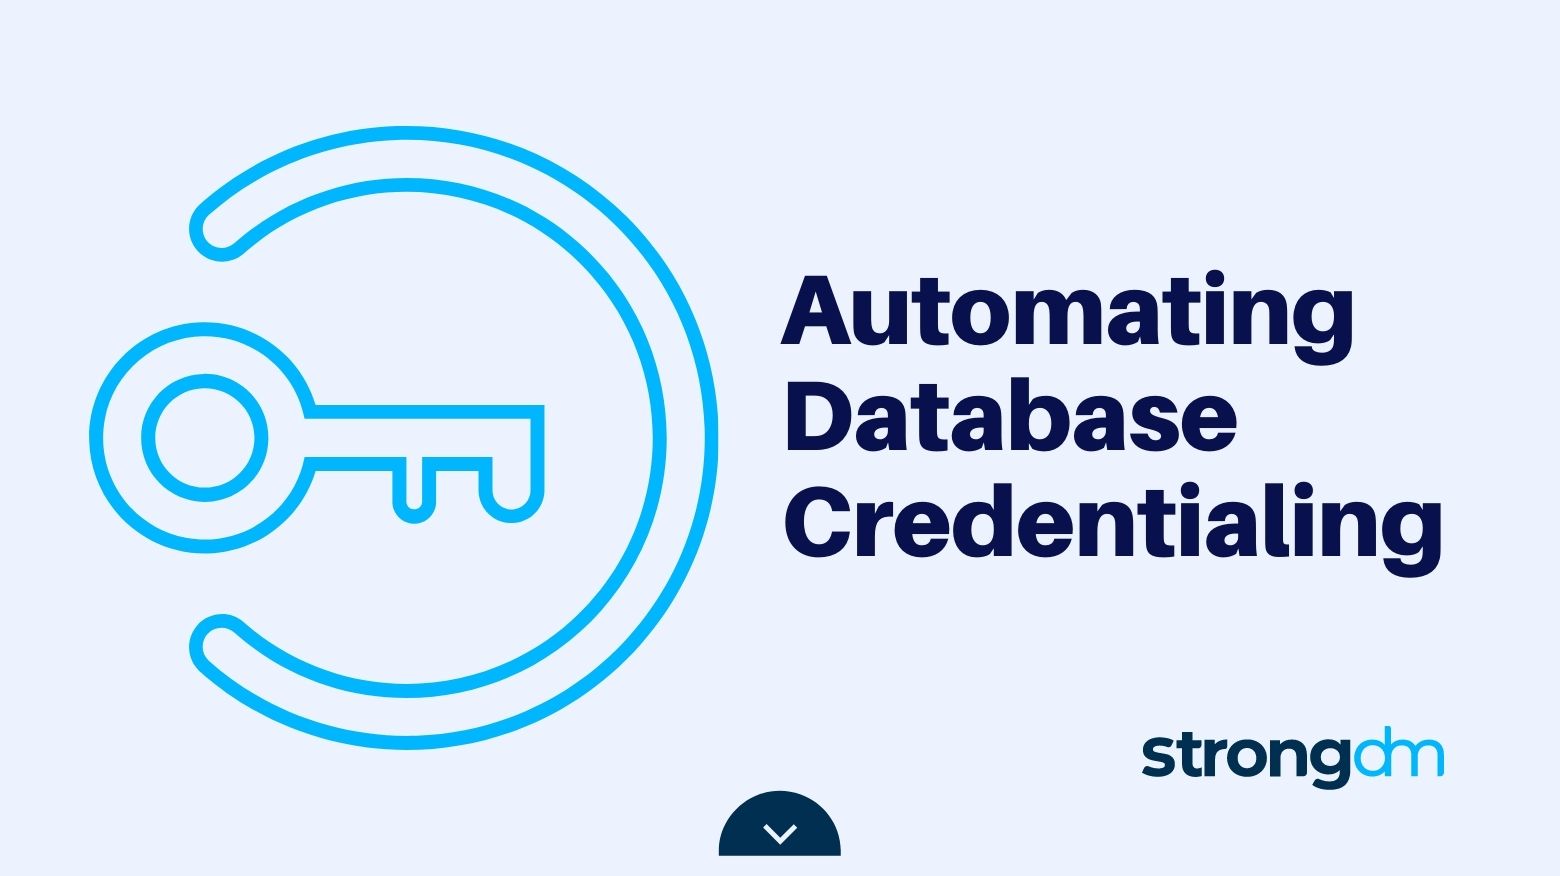 Automating Database Credentialing